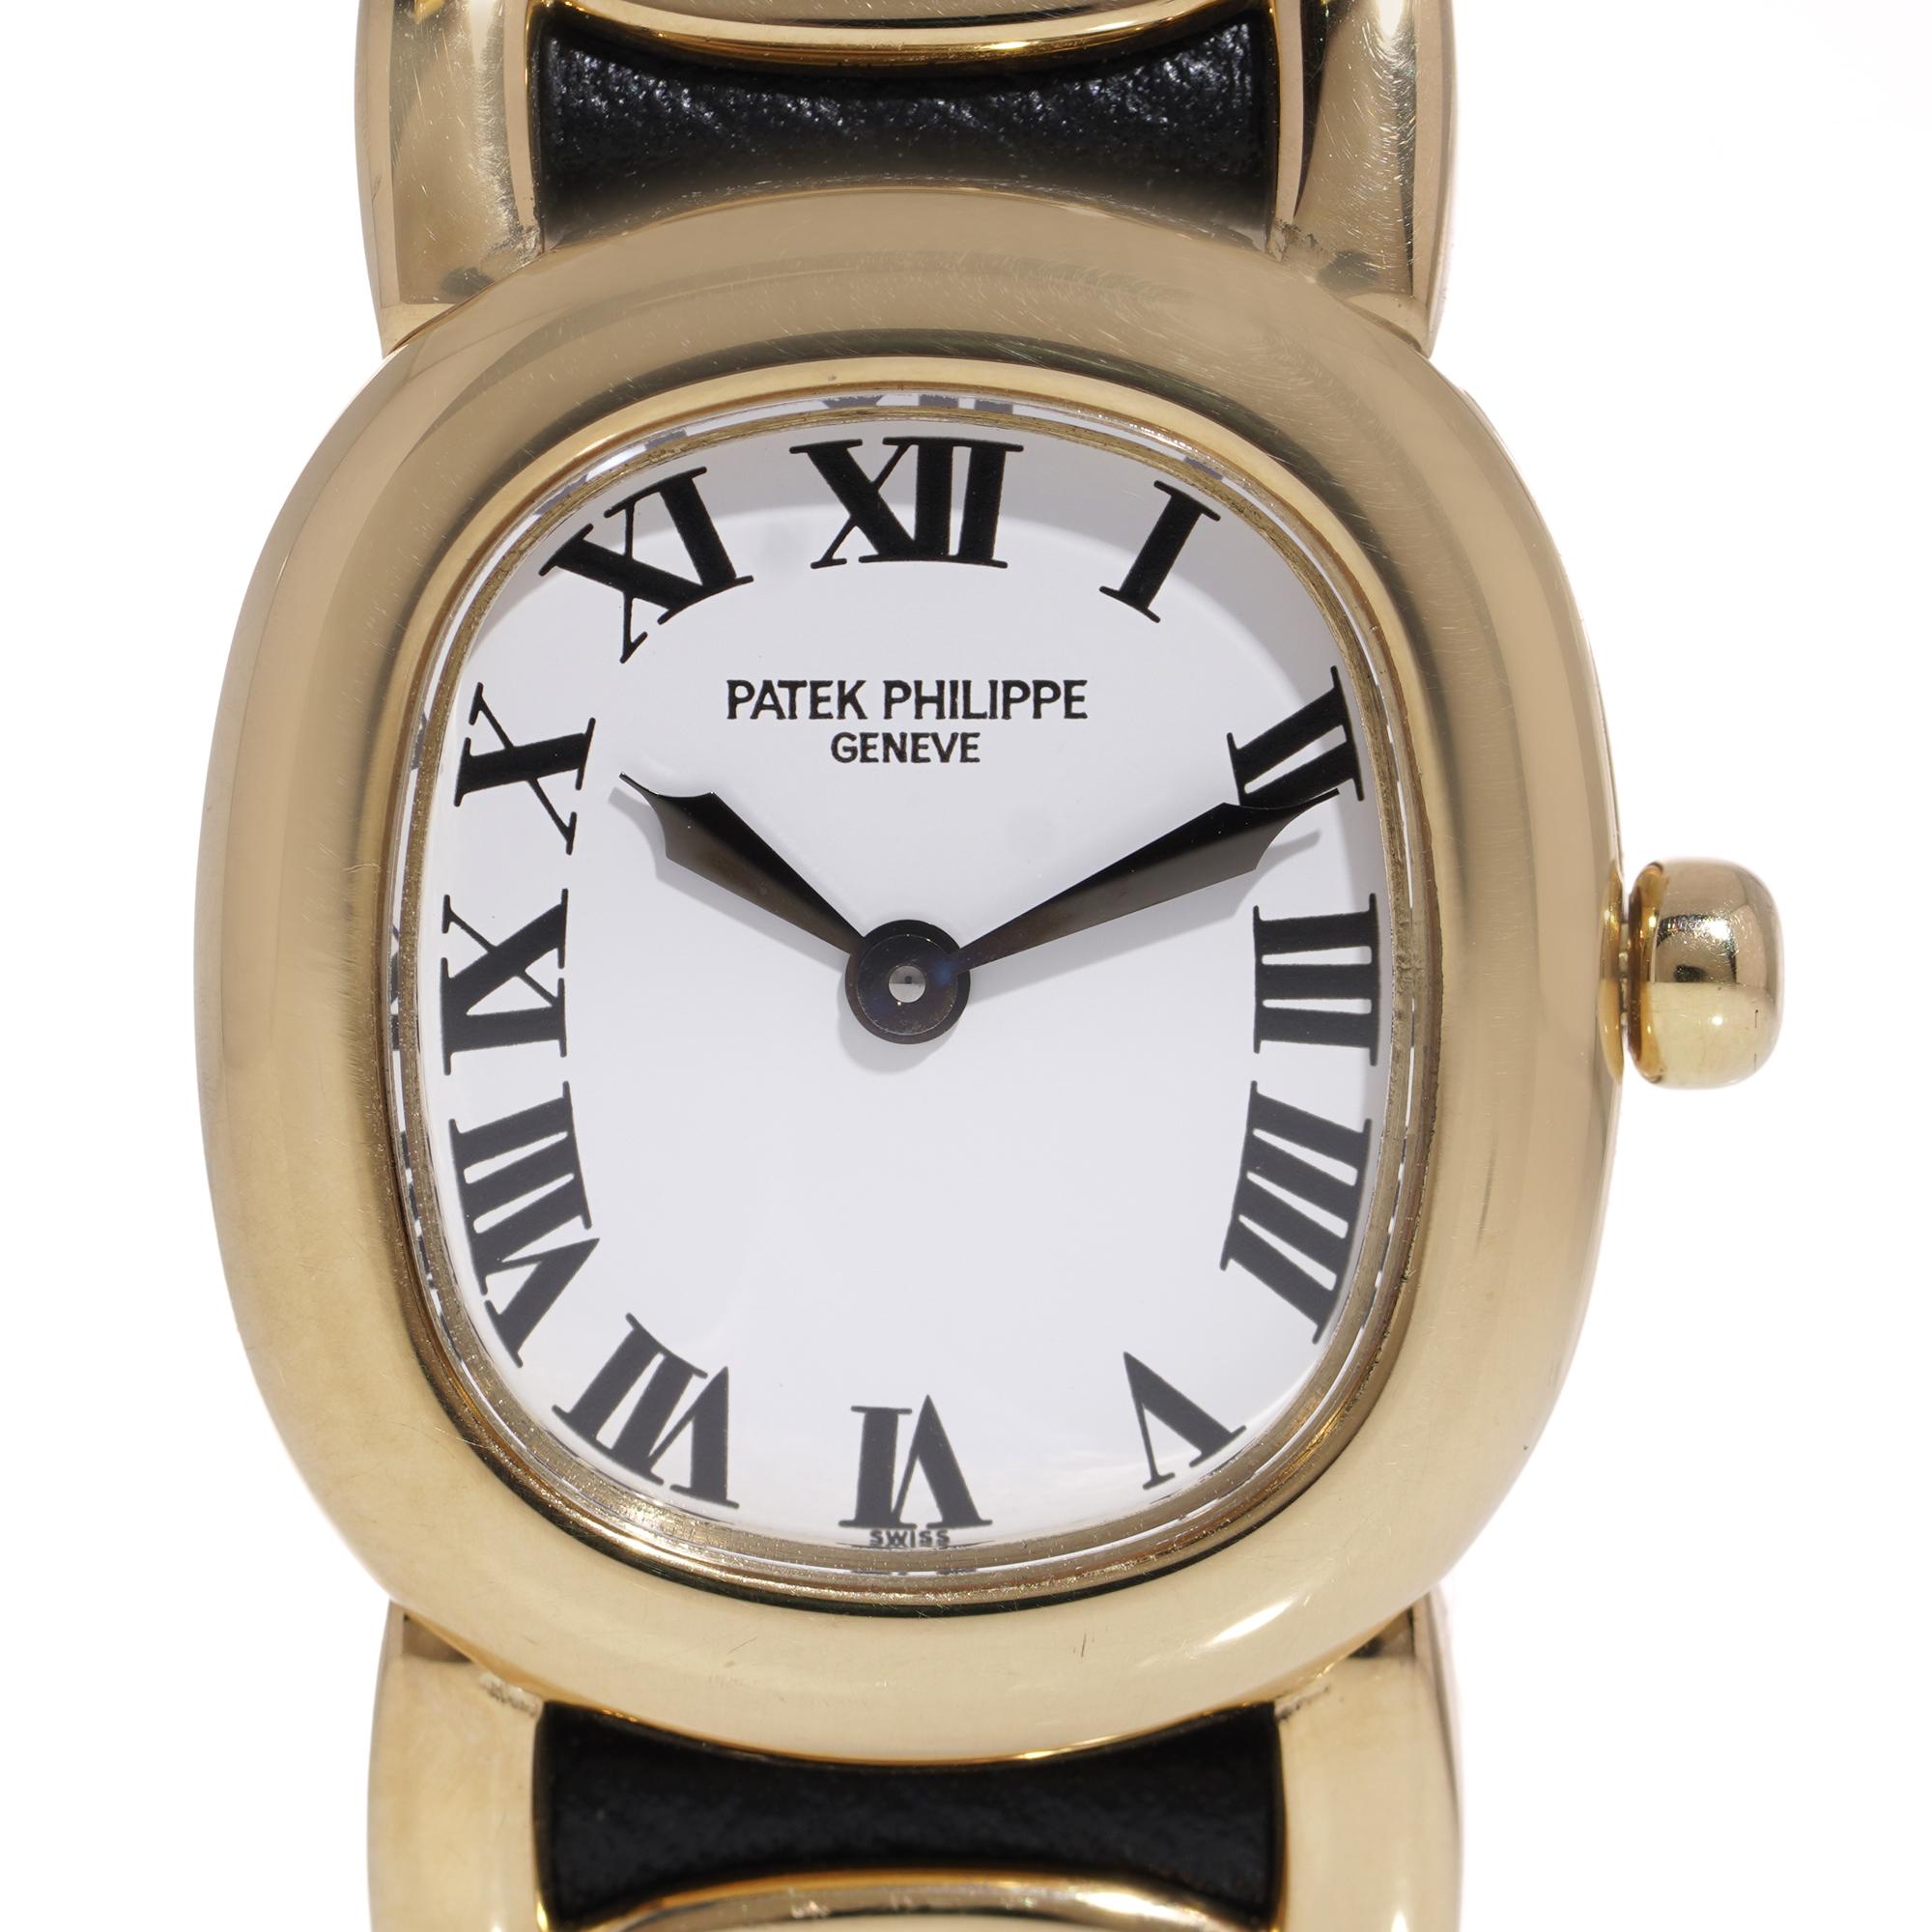 Patek Philippe 18kt. yellow gold ladies golden ellipse quartz wristwatch. Ref.4830

Two thousand years ago, Euclid discovered an enduring principle of aesthetic proportion known as the Golden Section. So perfect are the proportions of this design